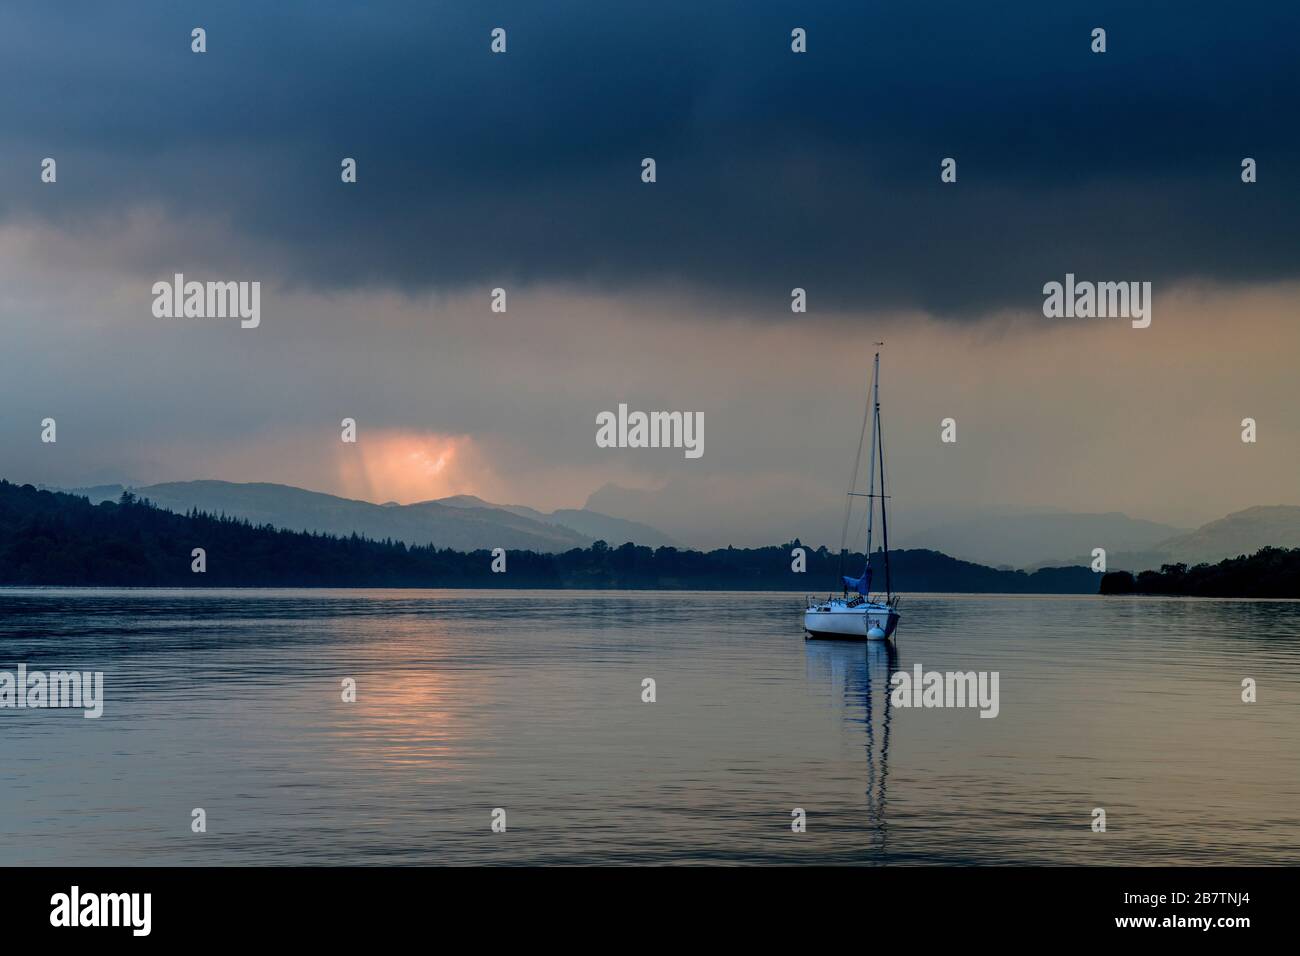 Lake Windermere from Miller Ground beach showing the distant hills, a shaft of sunlight and a moored yacht. That shaft of sunlight lights up the shot. Stock Photo